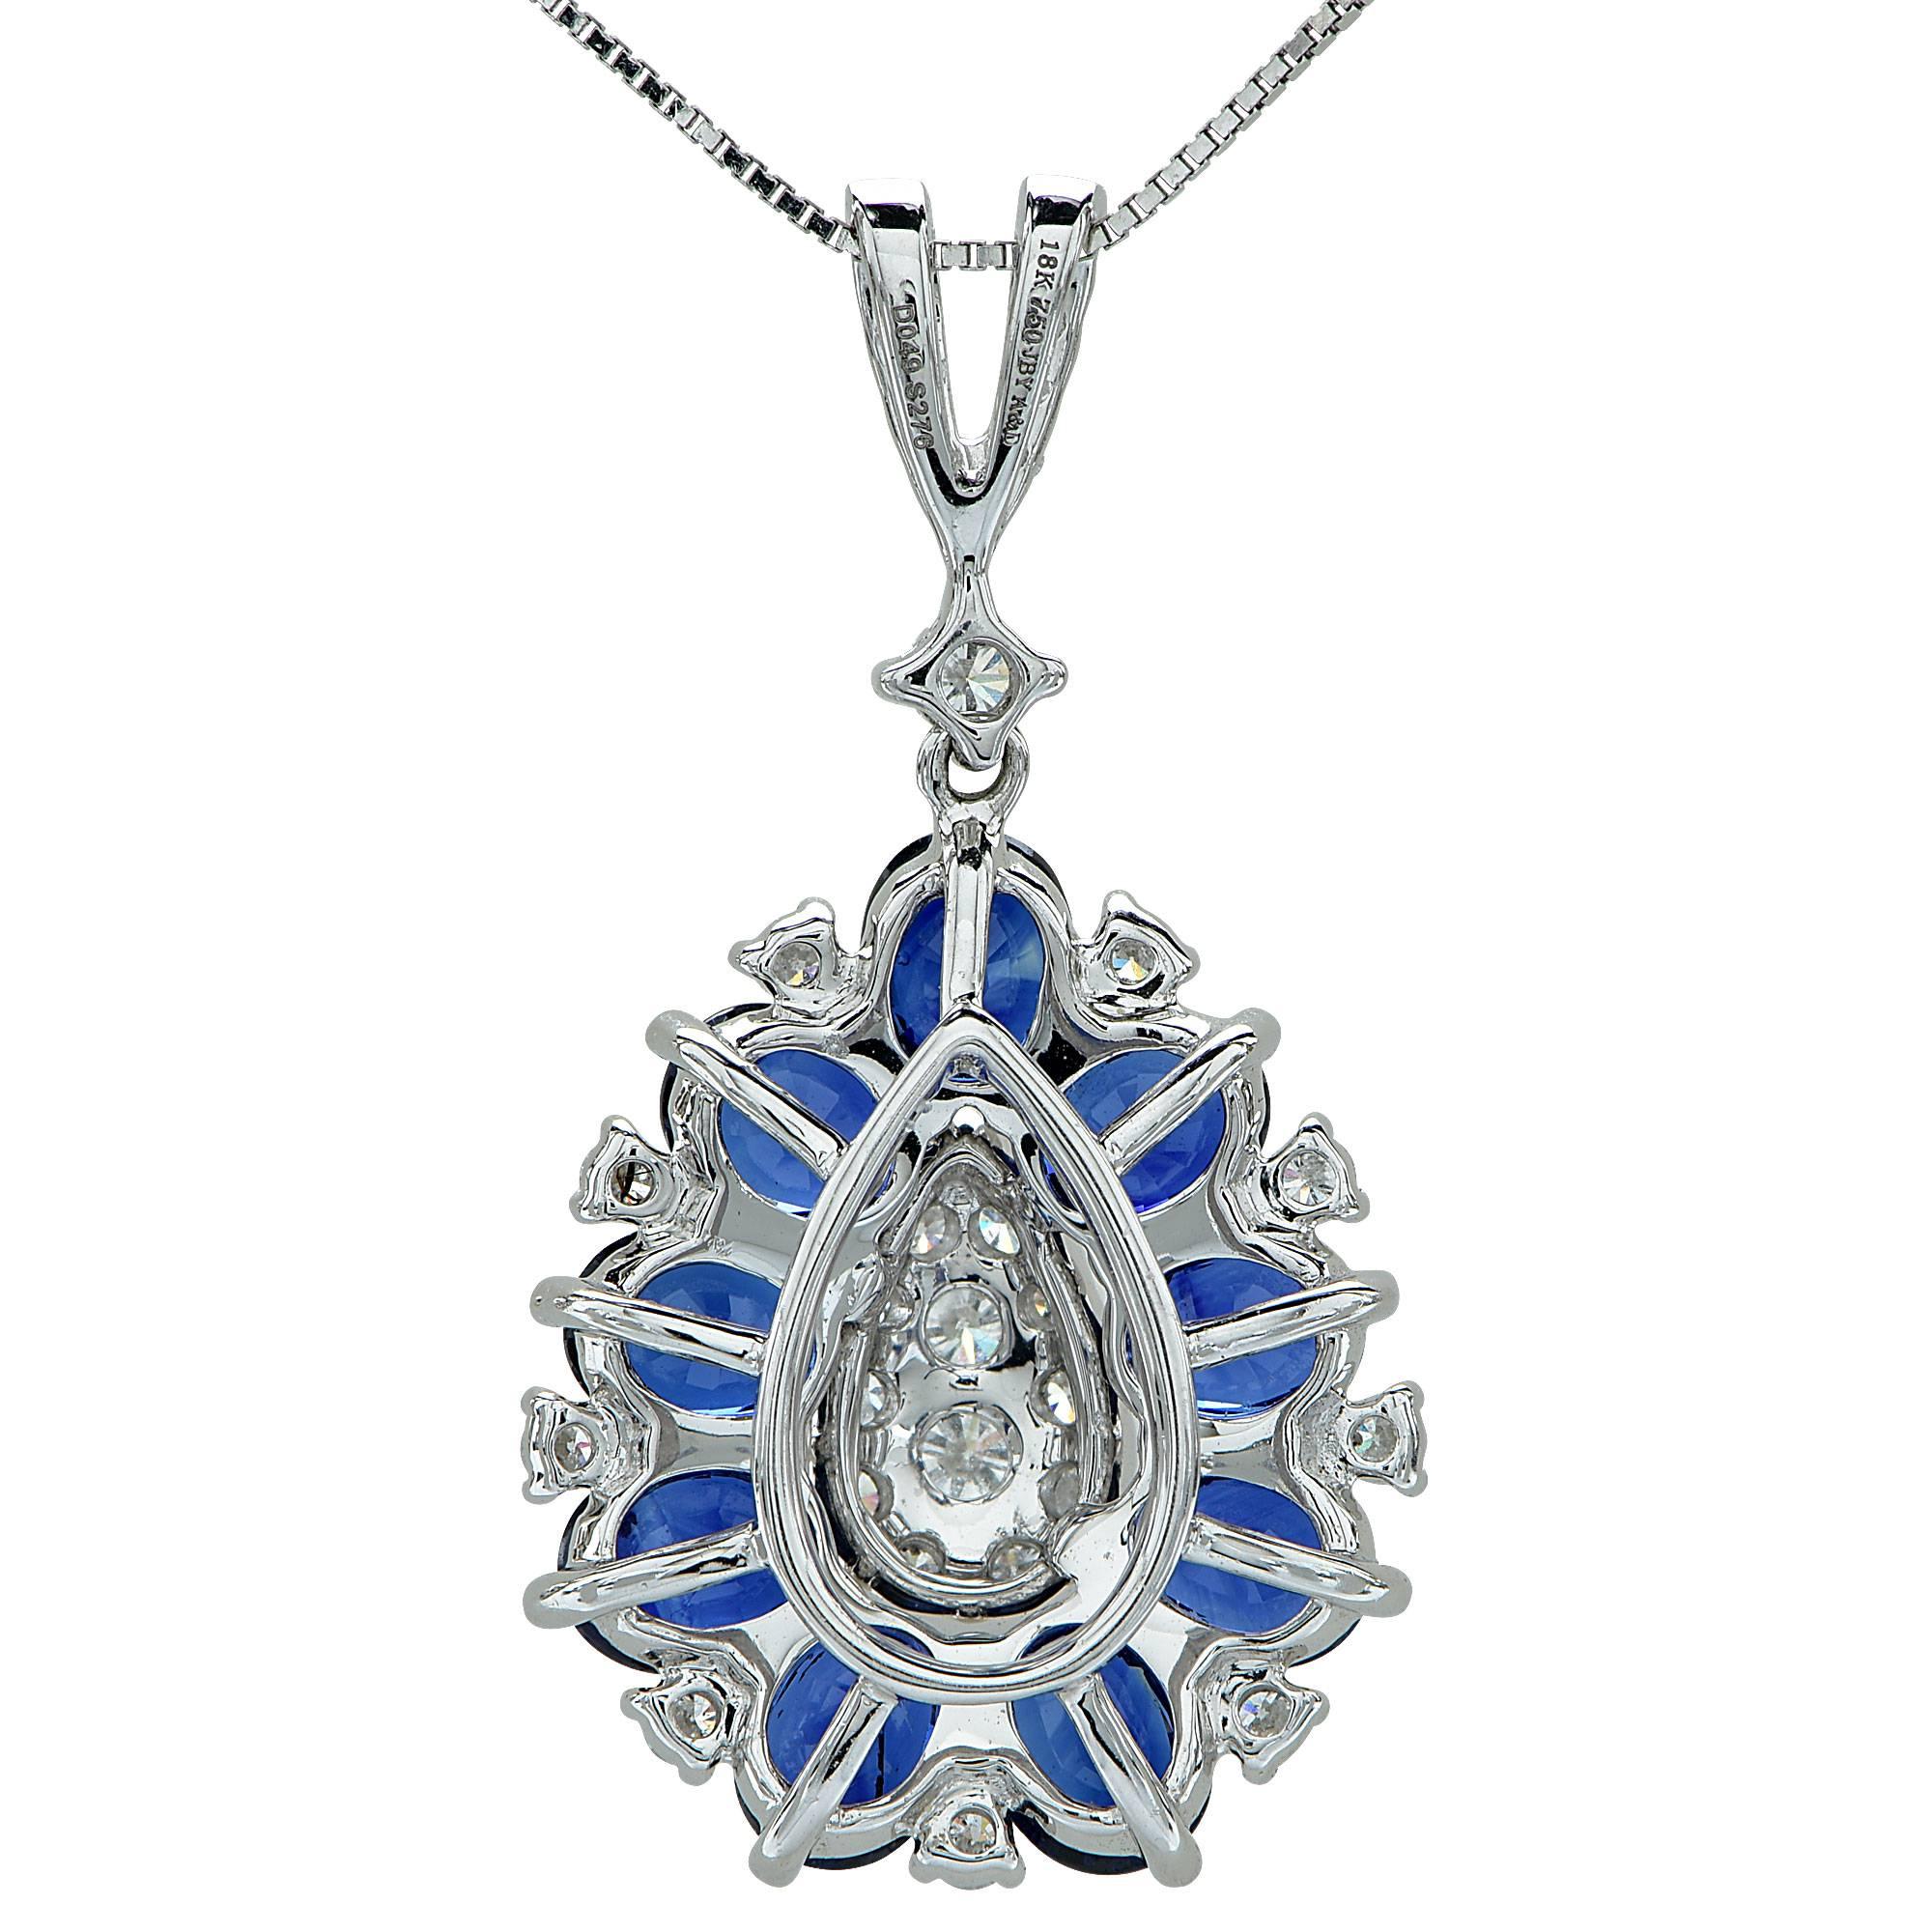 14k white gold necklace featuring 9 sapphires weighing approximately 3.00cts accompanied by 32 round brilliant cut diamonds weighing approximately .45cts total, G color, SI clarity.

Metal weight: 4.19 grams

This sapphire and diamond pendant